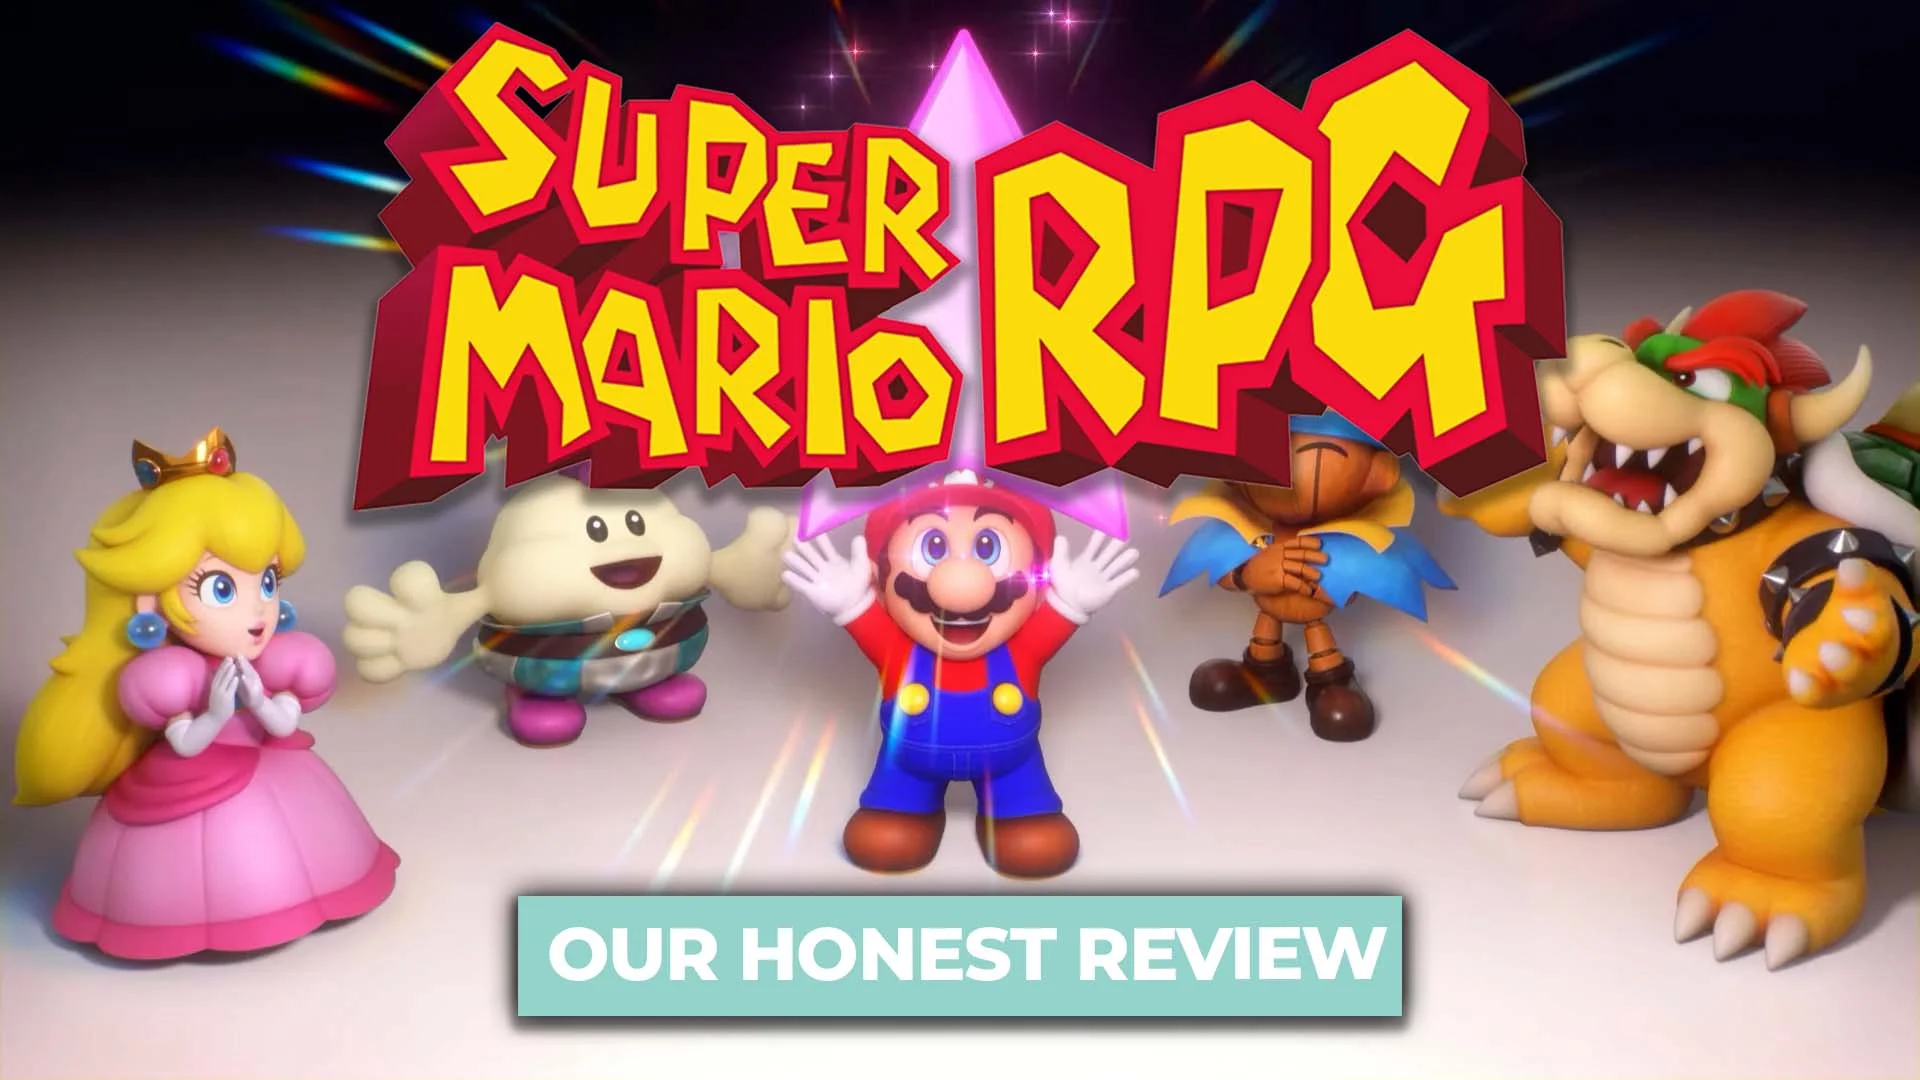 Super Mario RPG Review - A Charming & Authentic Remake